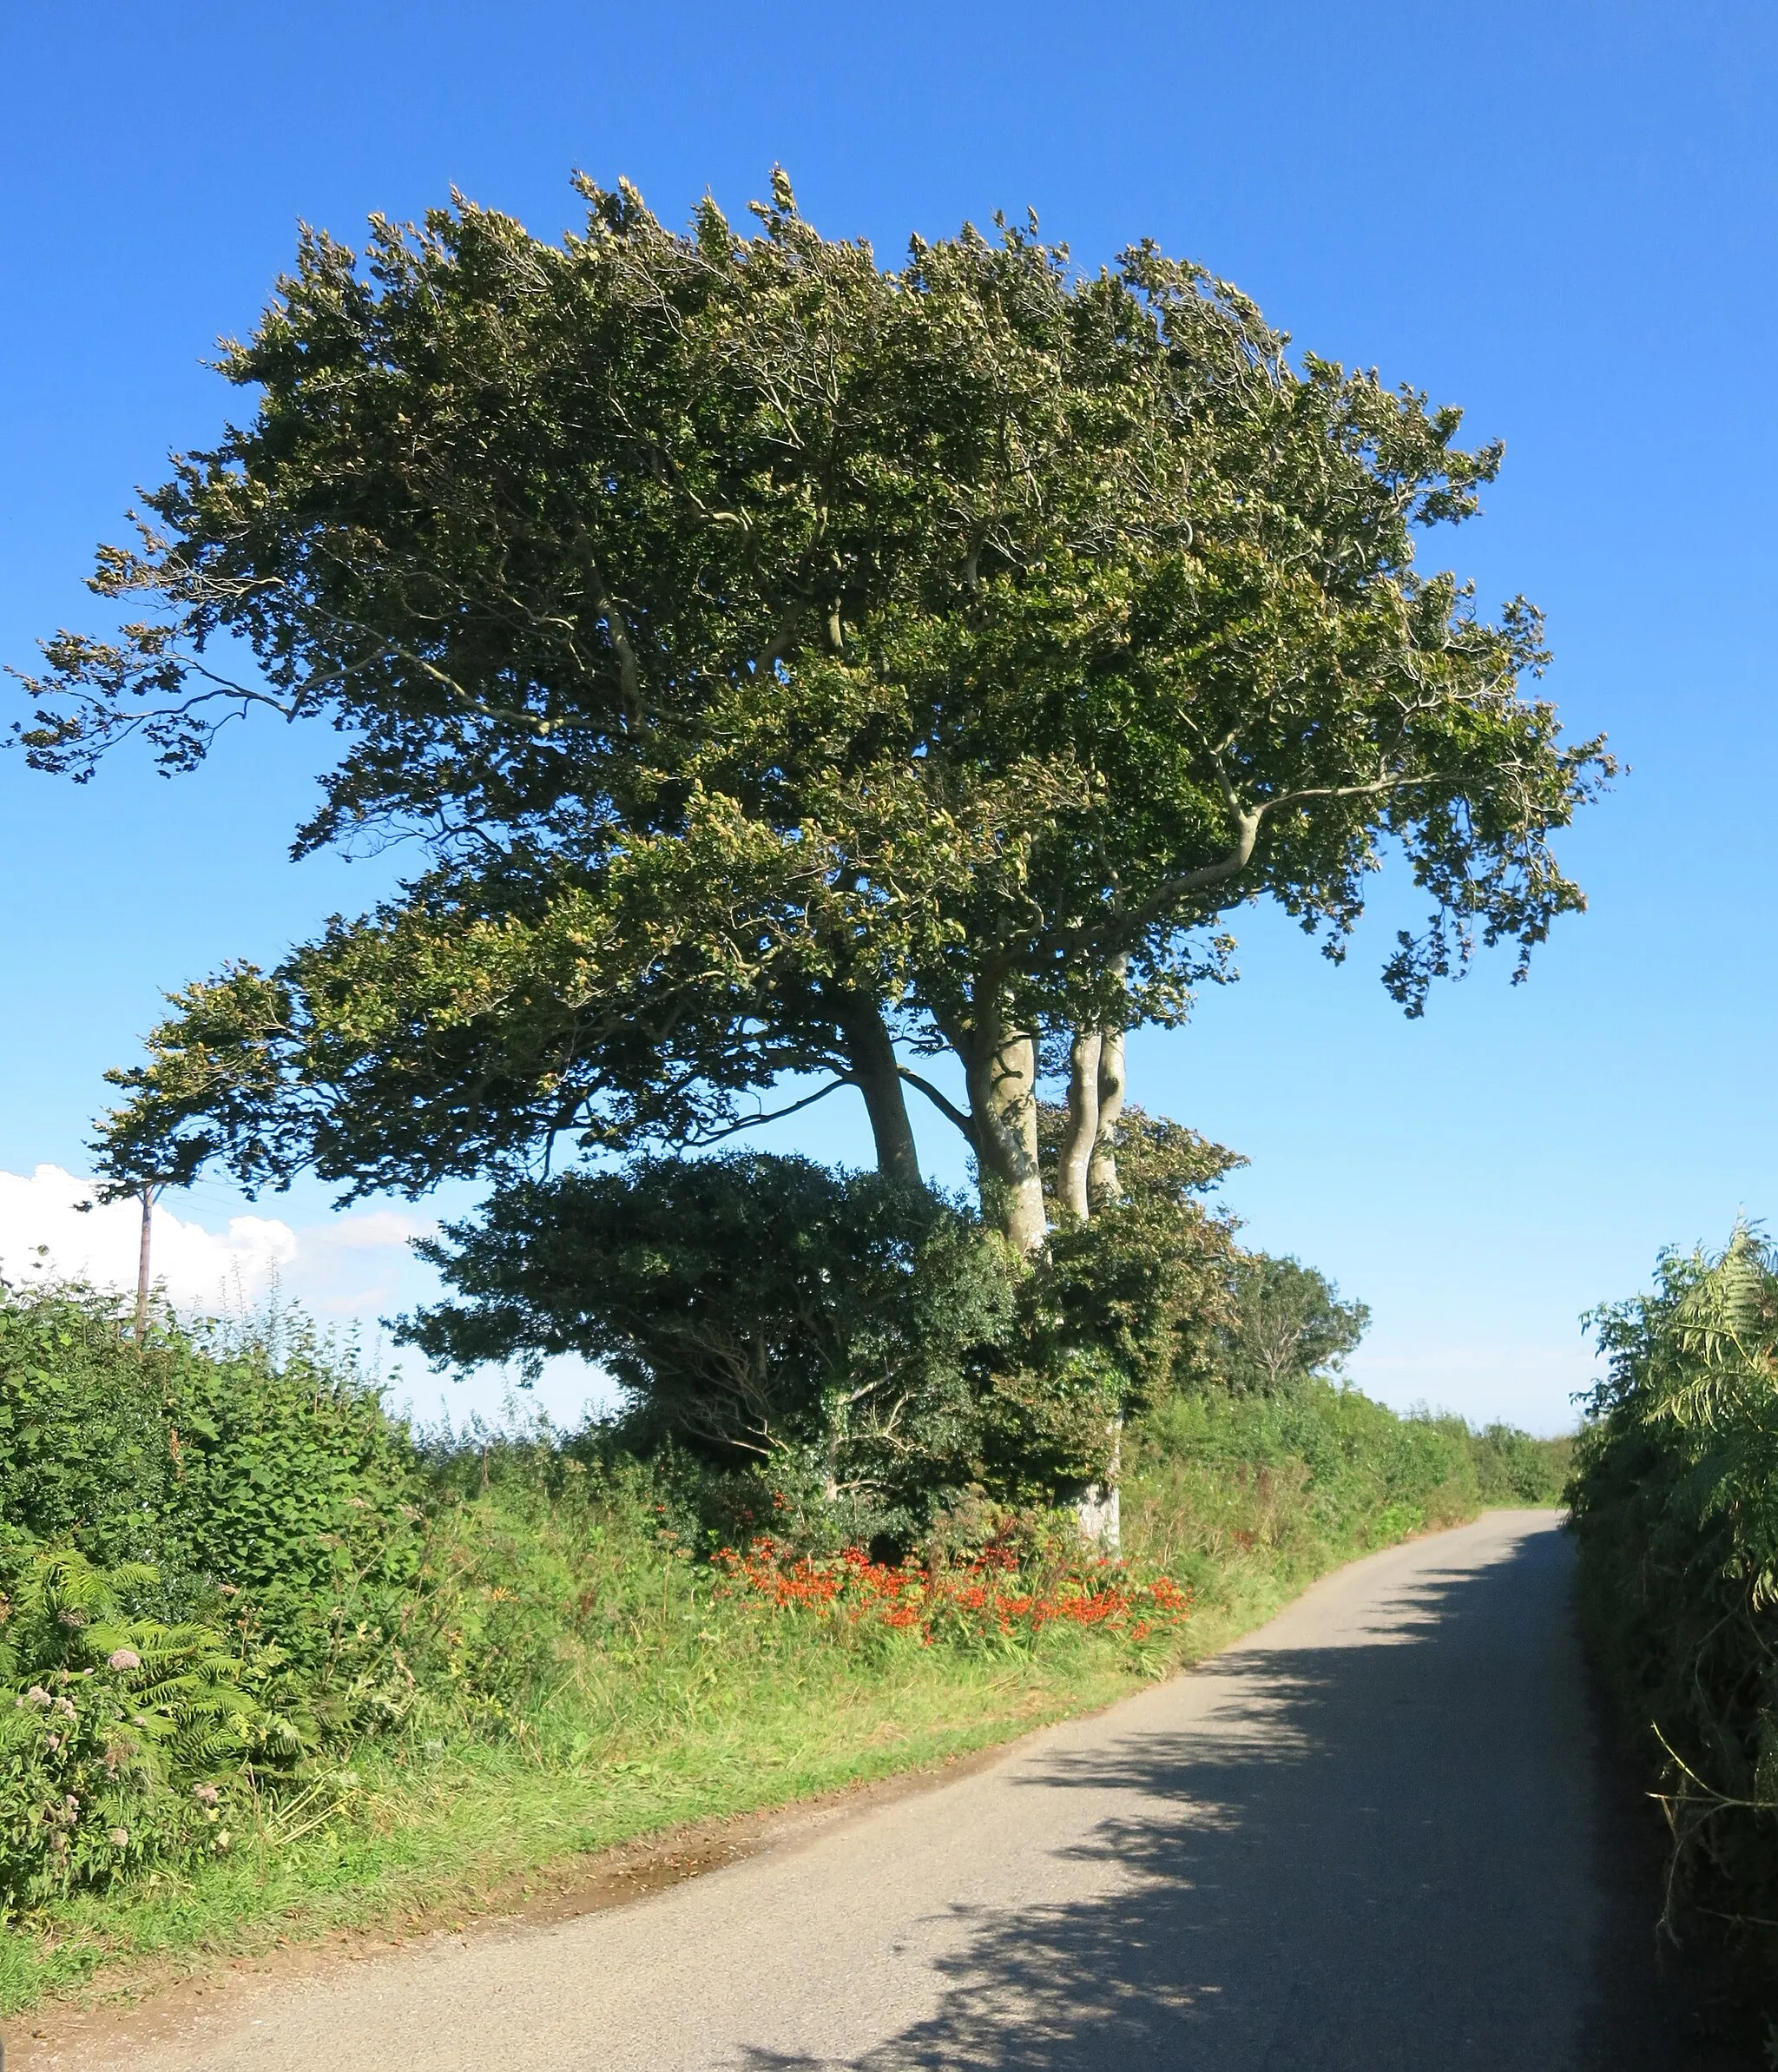 Photo showing: A Lane, A Tree and Some Flowers